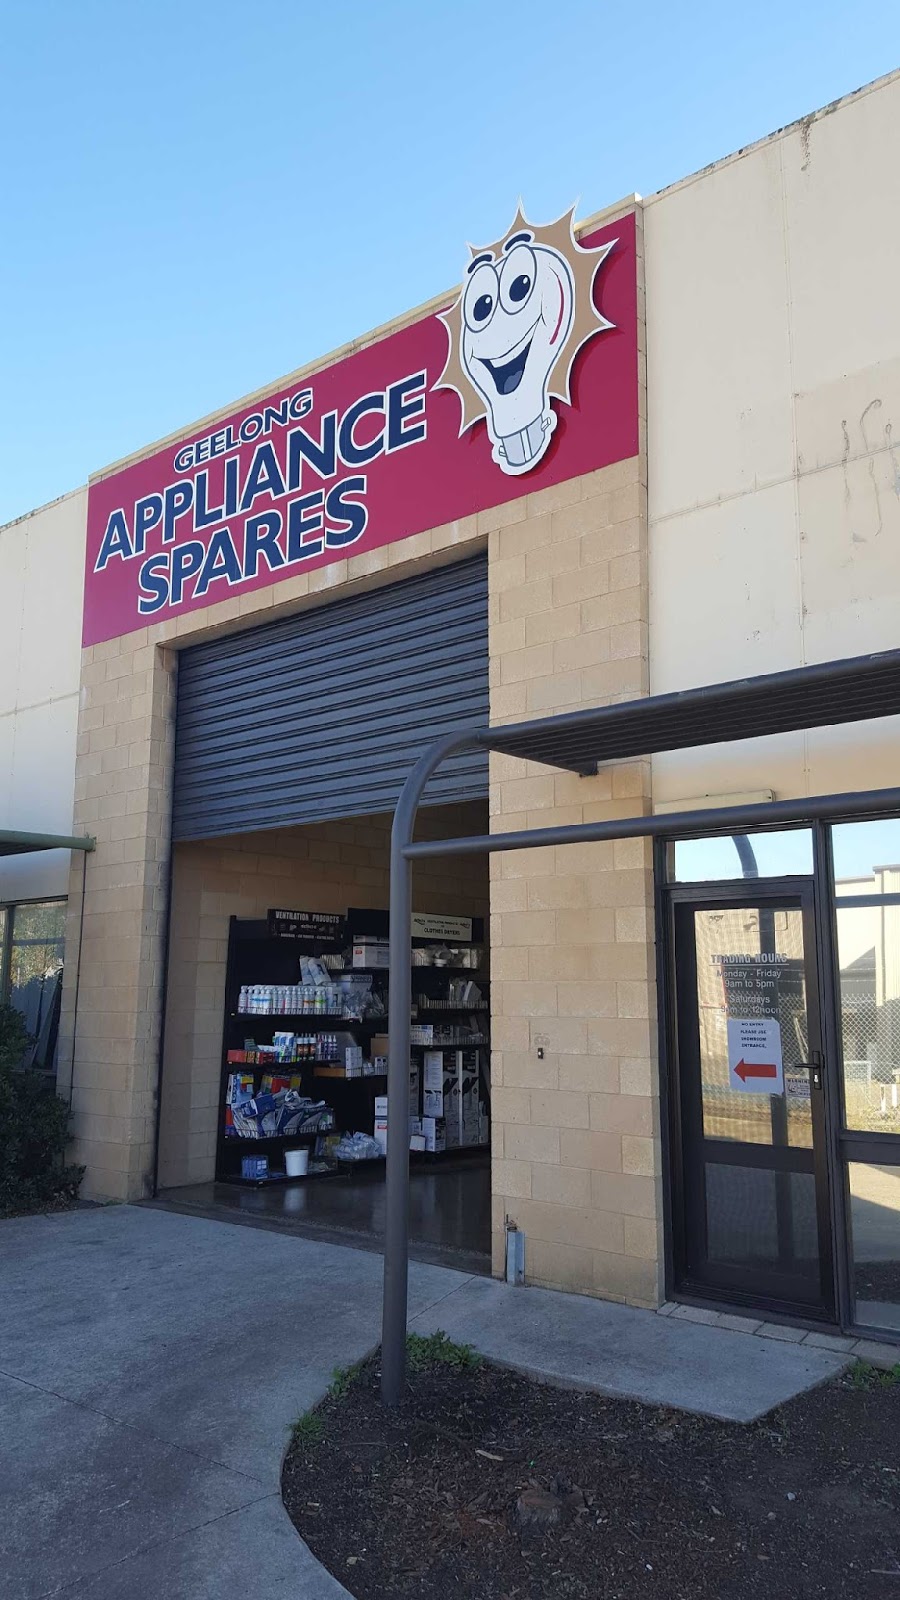 Geelong Appliance Spares | home goods store | Unit 3/156 Victoria St, North Geelong VIC 3215, Australia | 0352787701 OR +61 3 5278 7701